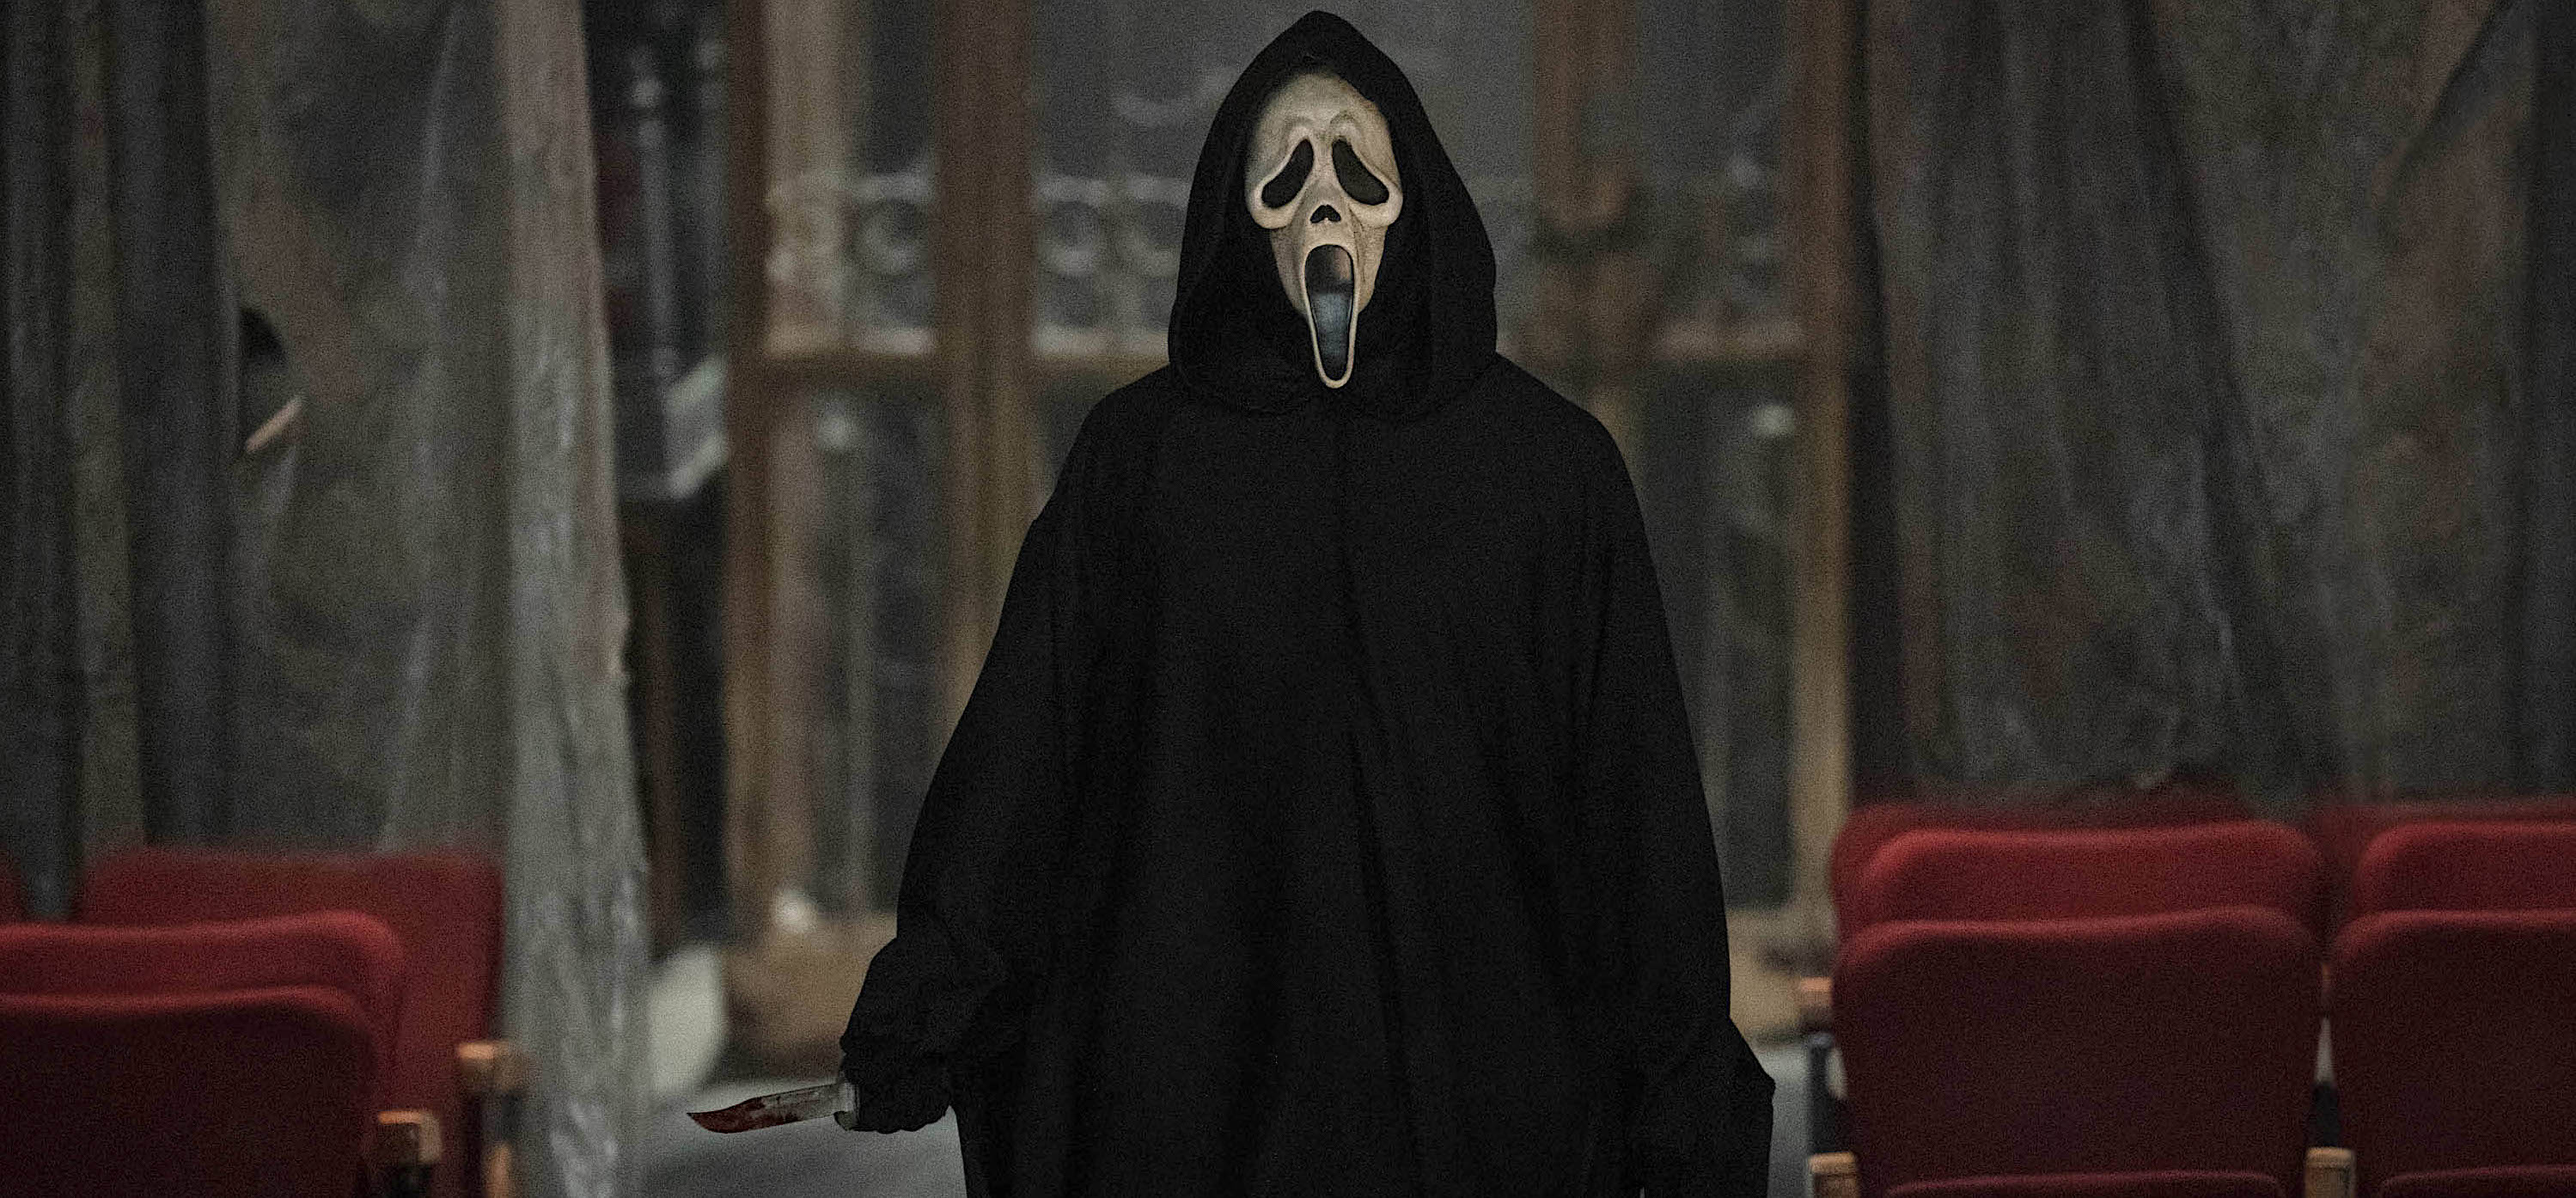 A photo of Scream VI’s Ghostface, with trademark melting scream face and black cloak, holding a knife